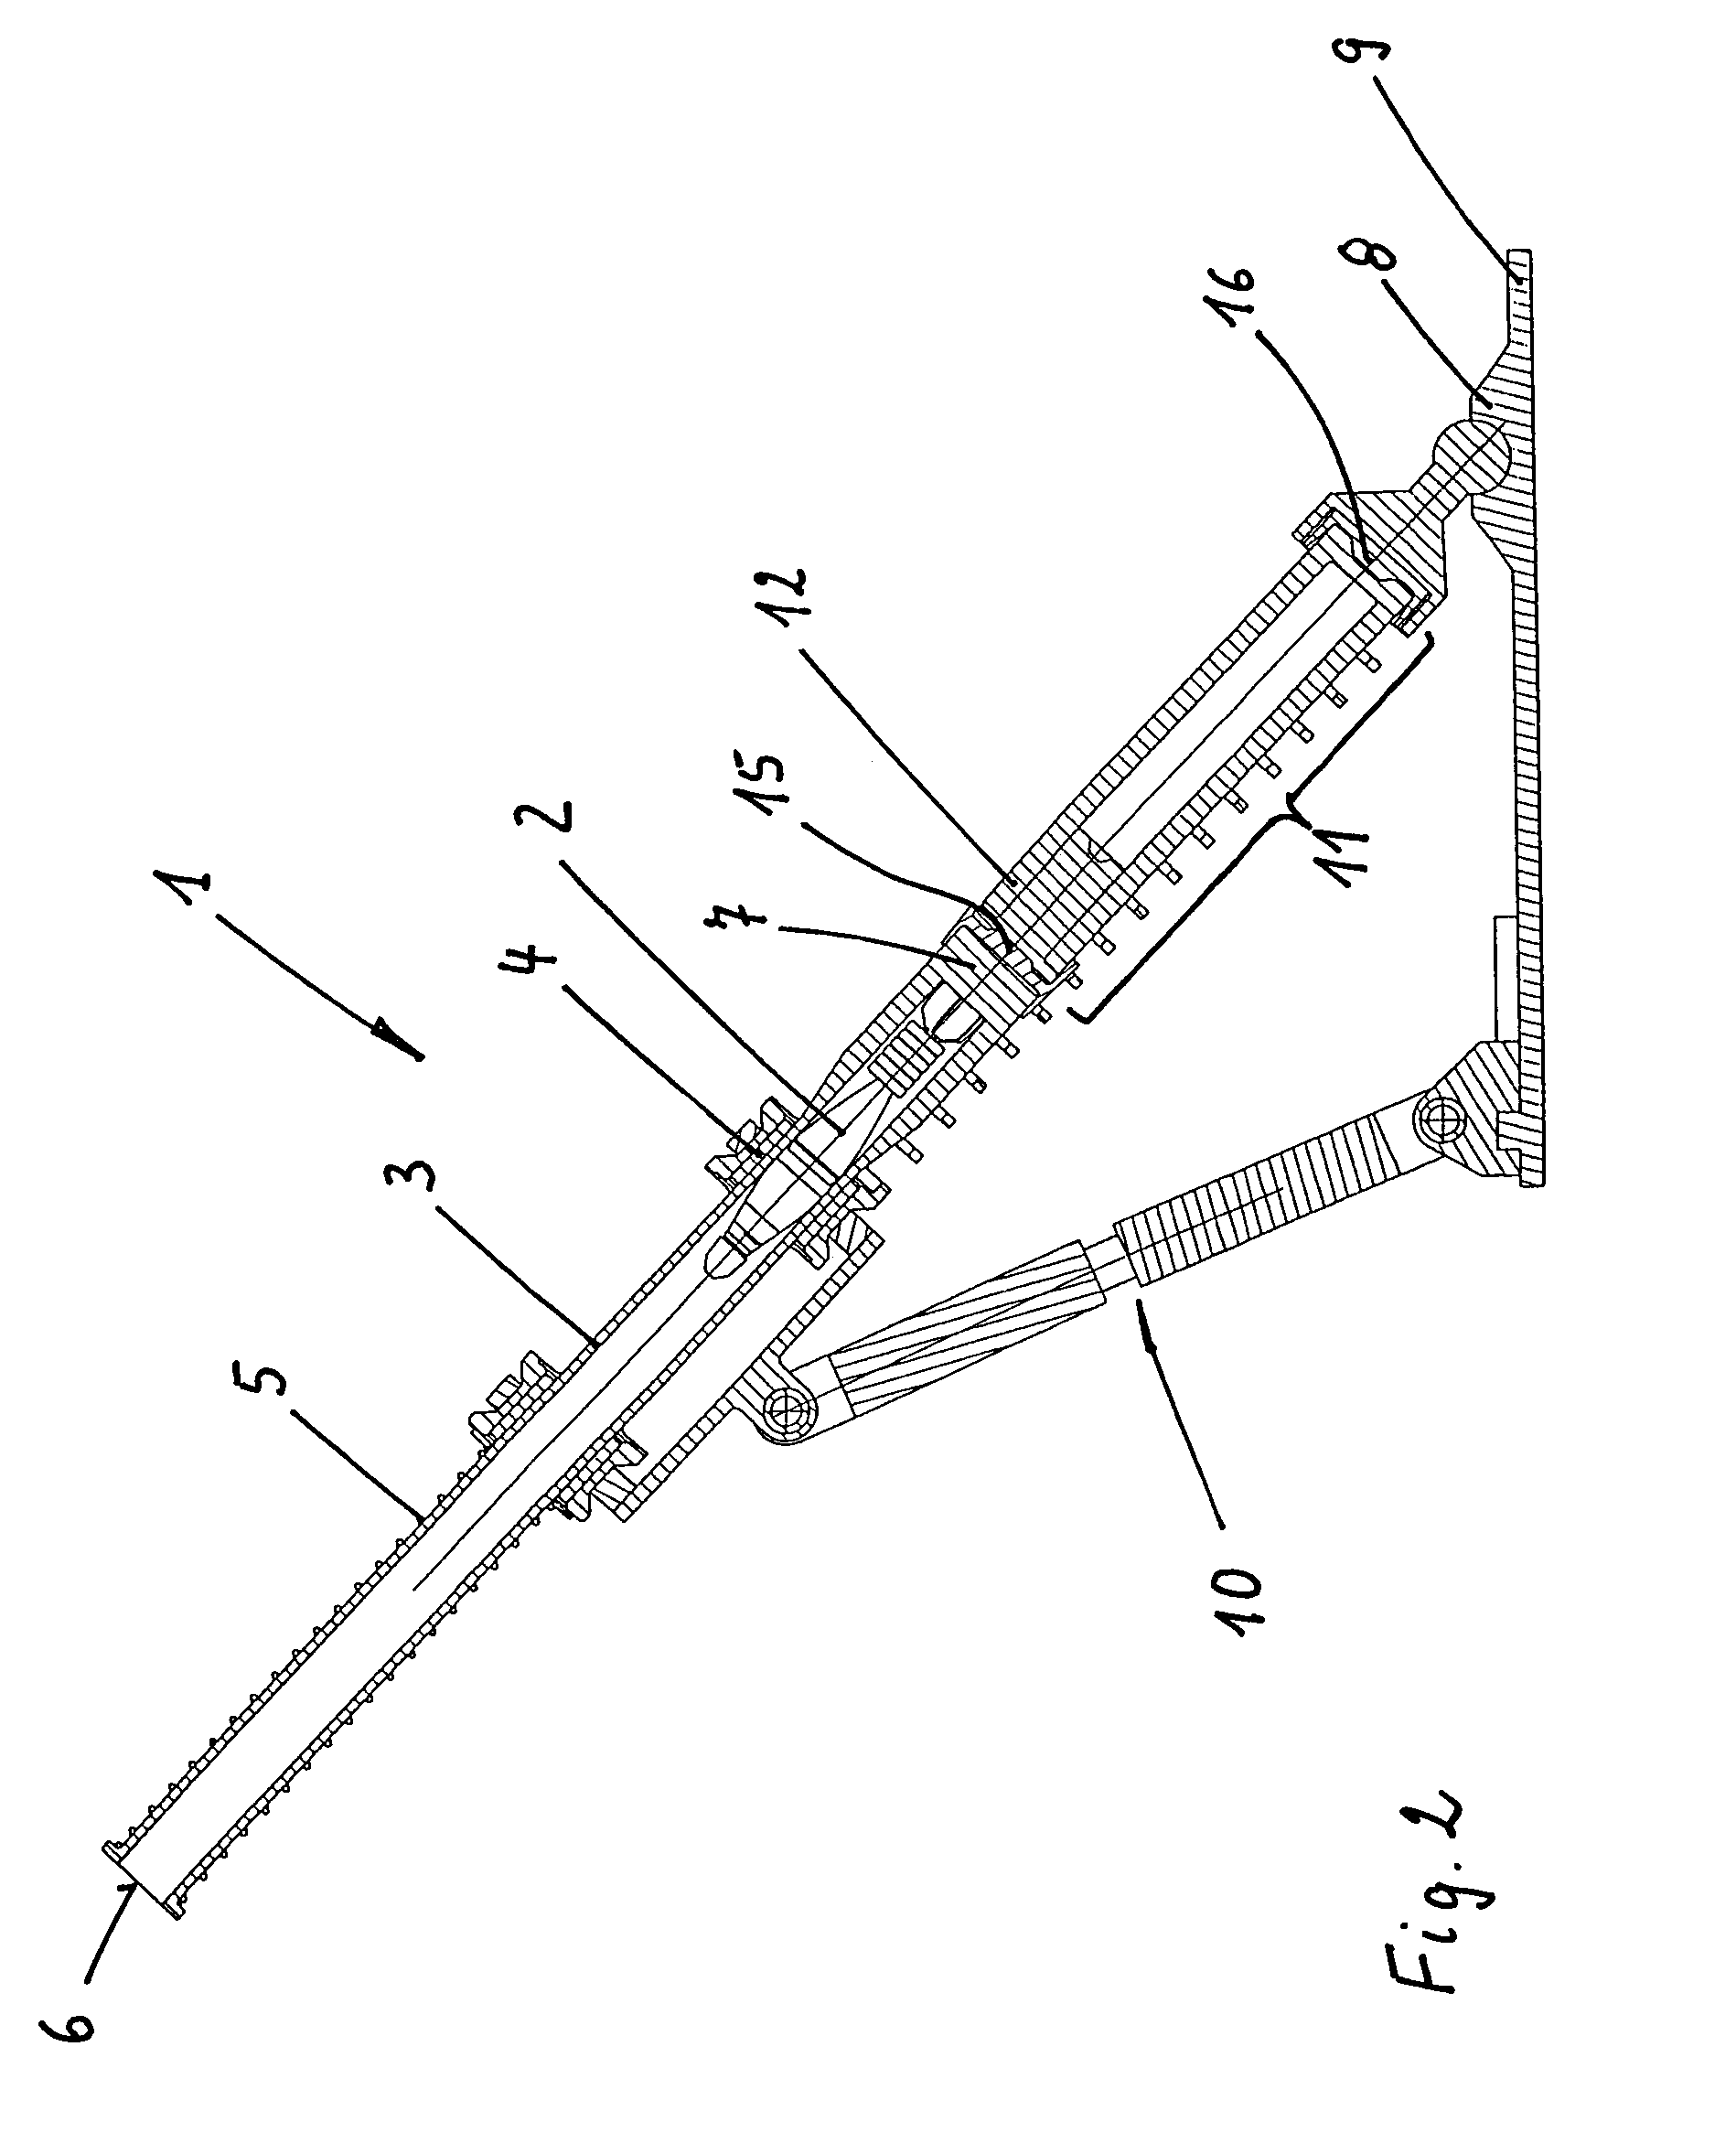 Weapon with recoil and braking device, damping this recoil